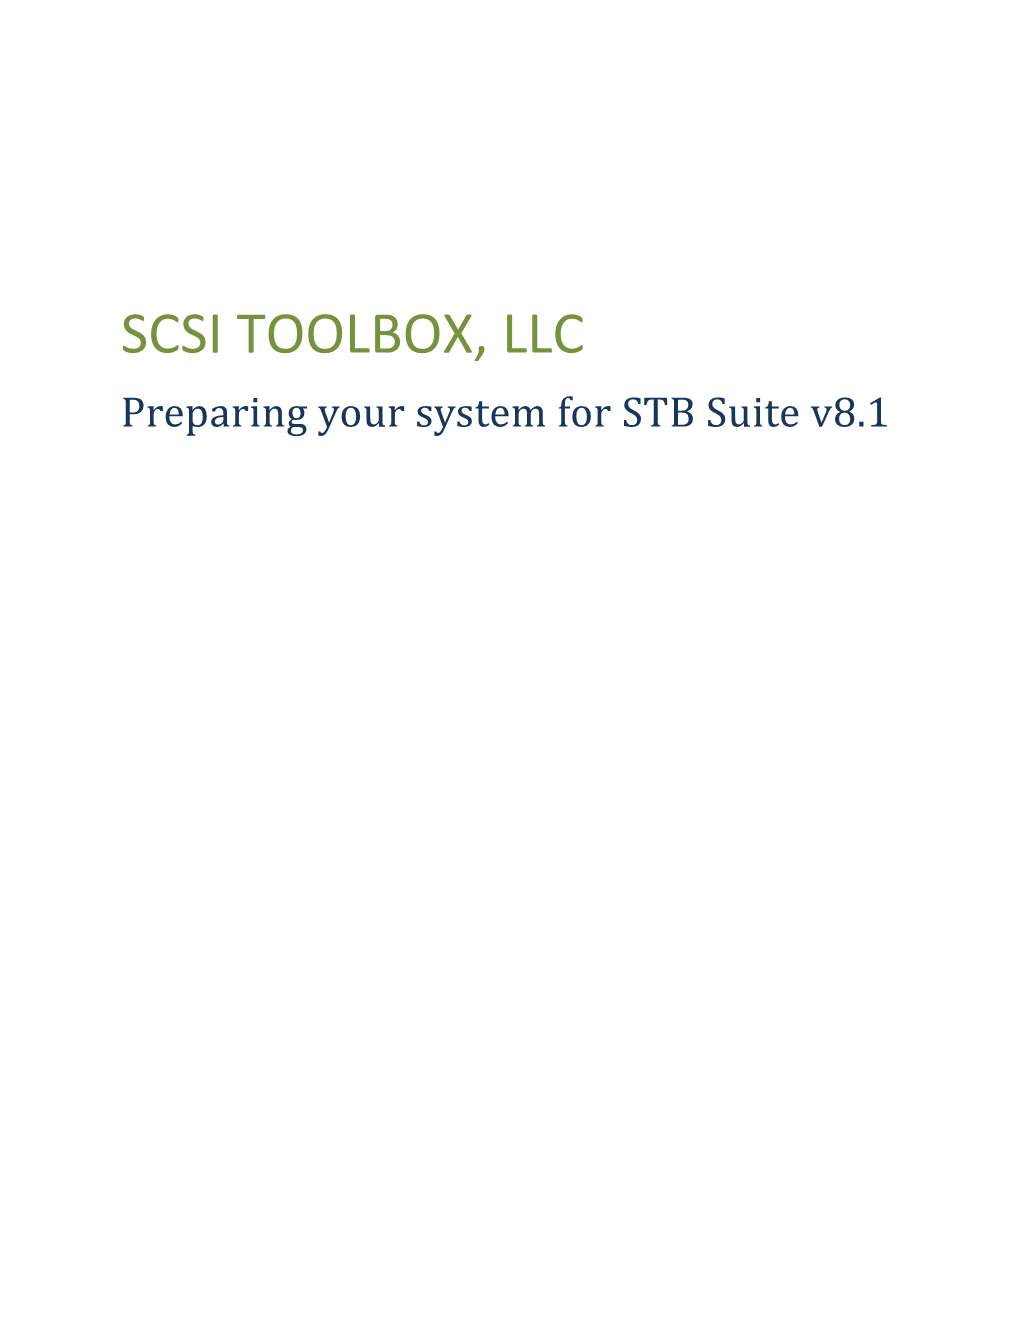 Preparing Your System for STB Suite V8.1